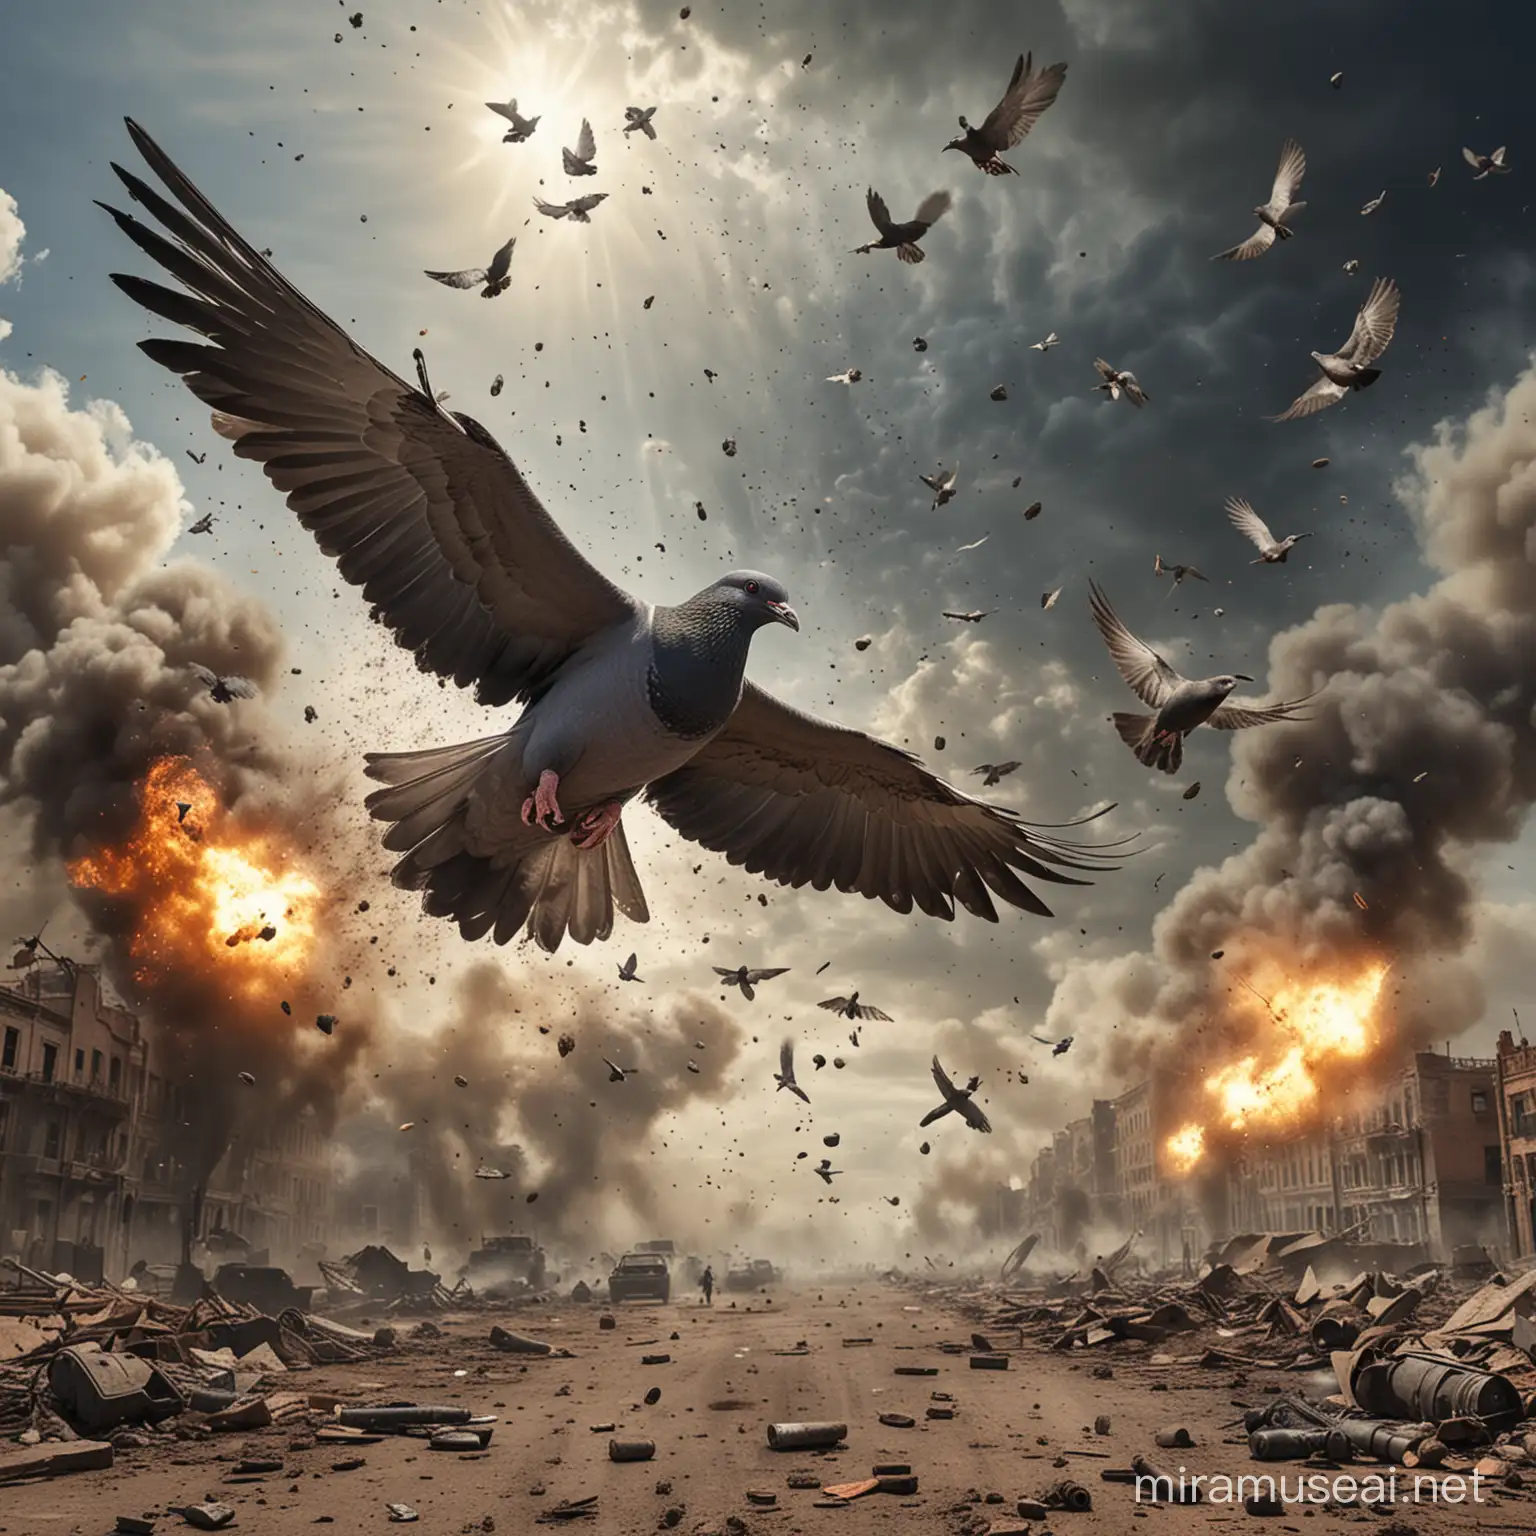 a very realistic image of a wounded and blinded pigeon flying over a war zone with explosions and gun fire flying through the air 